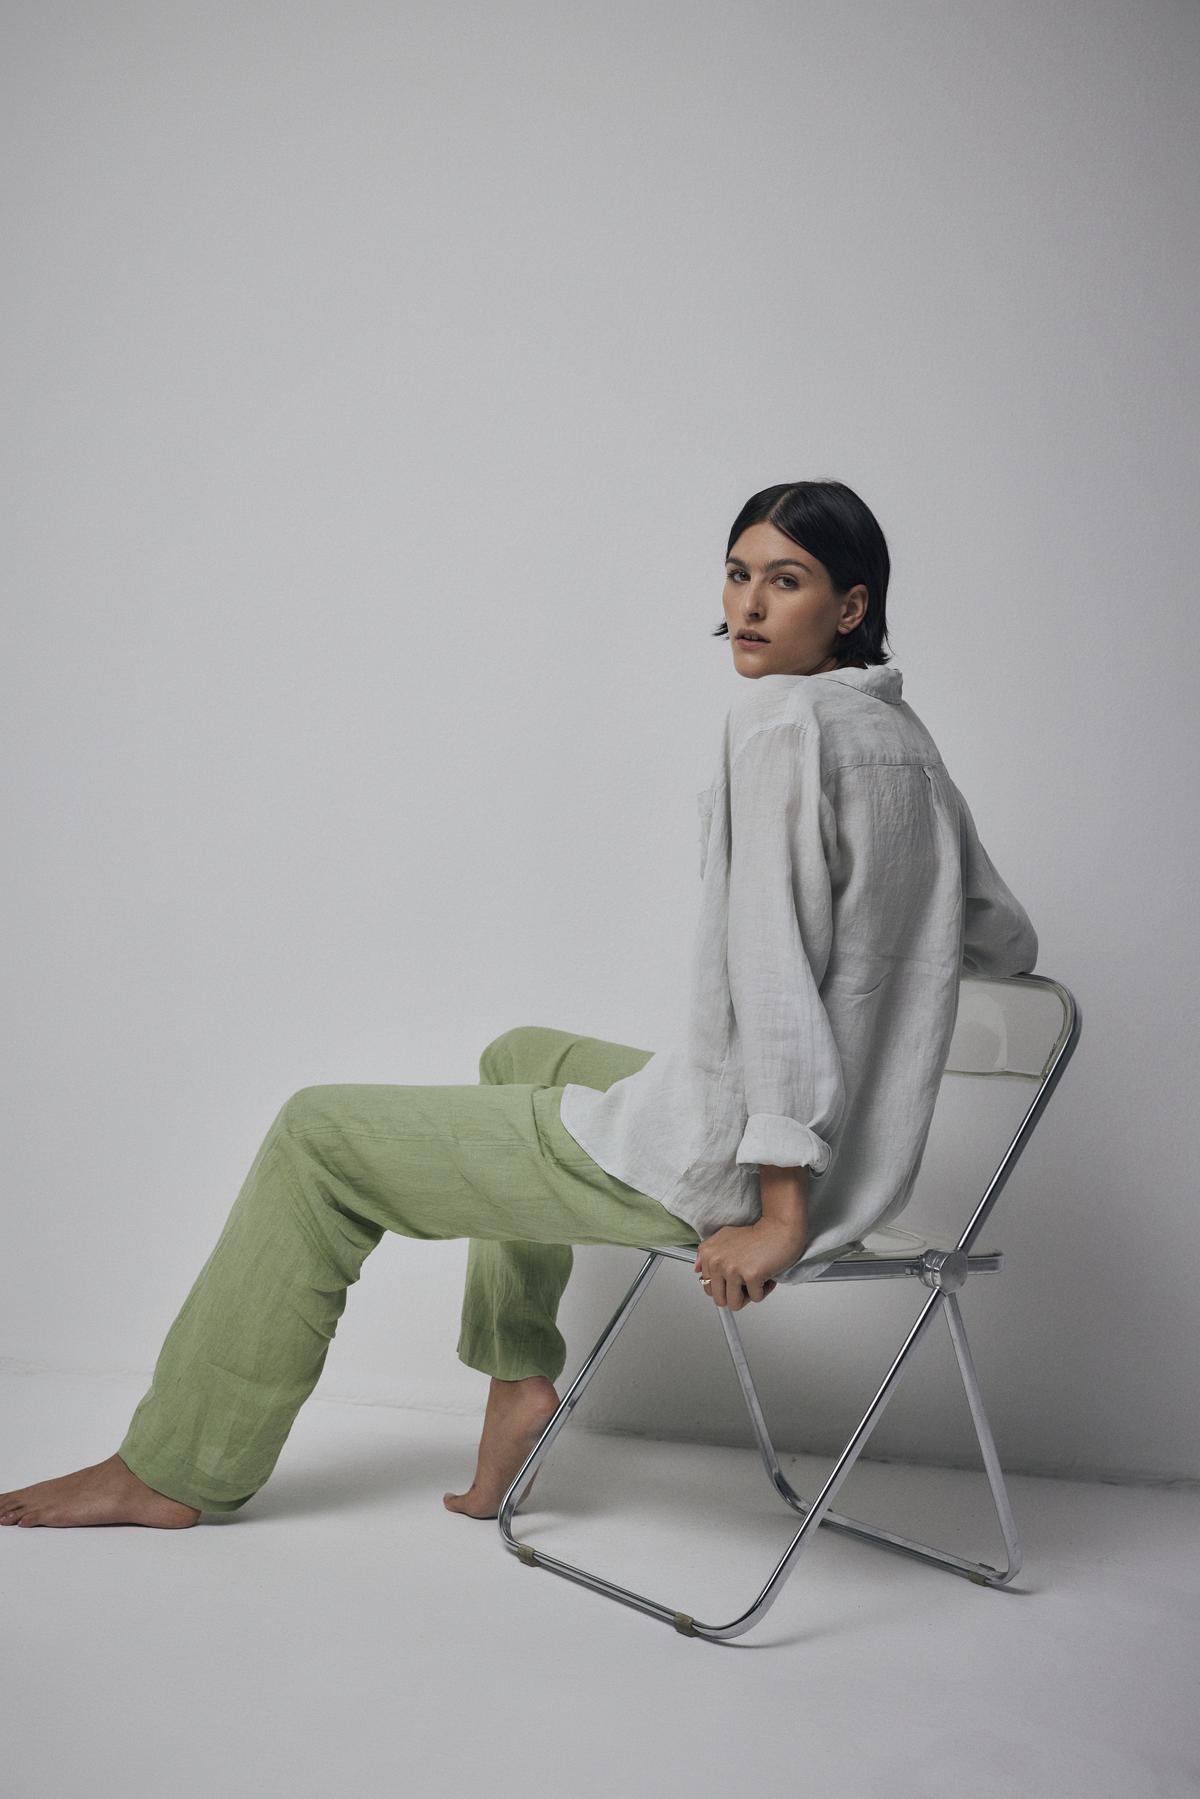 A person with long dark hair, dressed in a relaxed silhouette featuring a light-colored MULHOLLAND LINEN SHIRT by Velvet by Jenny Graham and green pants, sits barefoot on a folding chair against a plain backdrop.-36212529758401